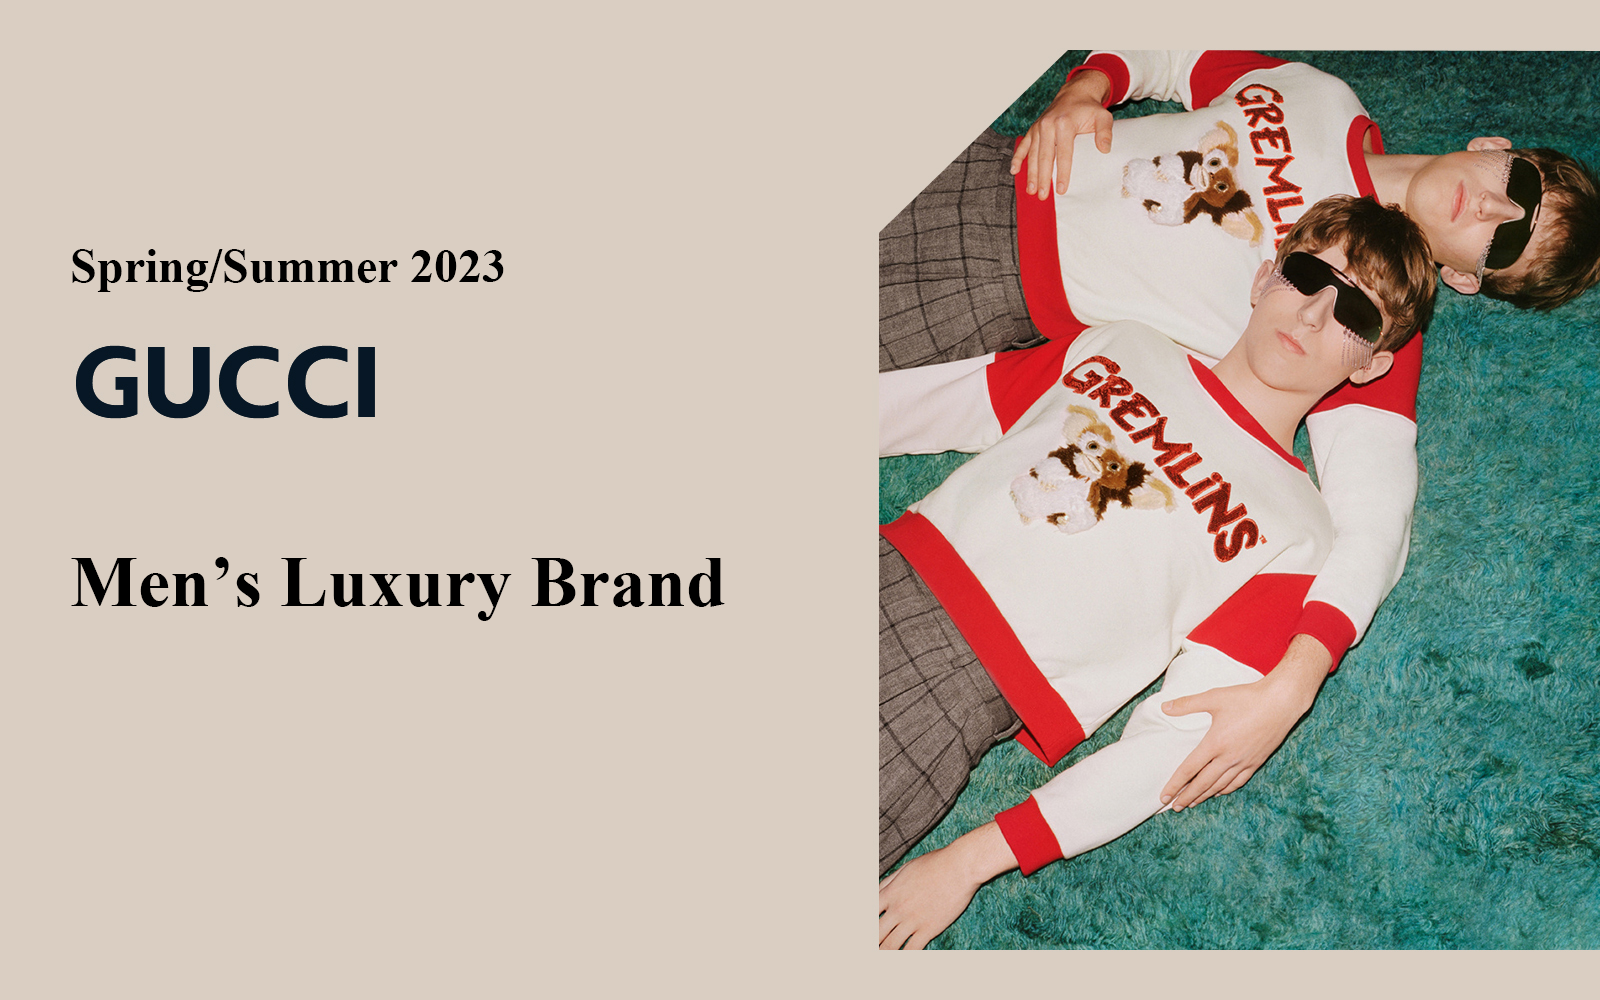 Twinsburg -- The Analysis of GUCCI The Luxury Menswear Brand